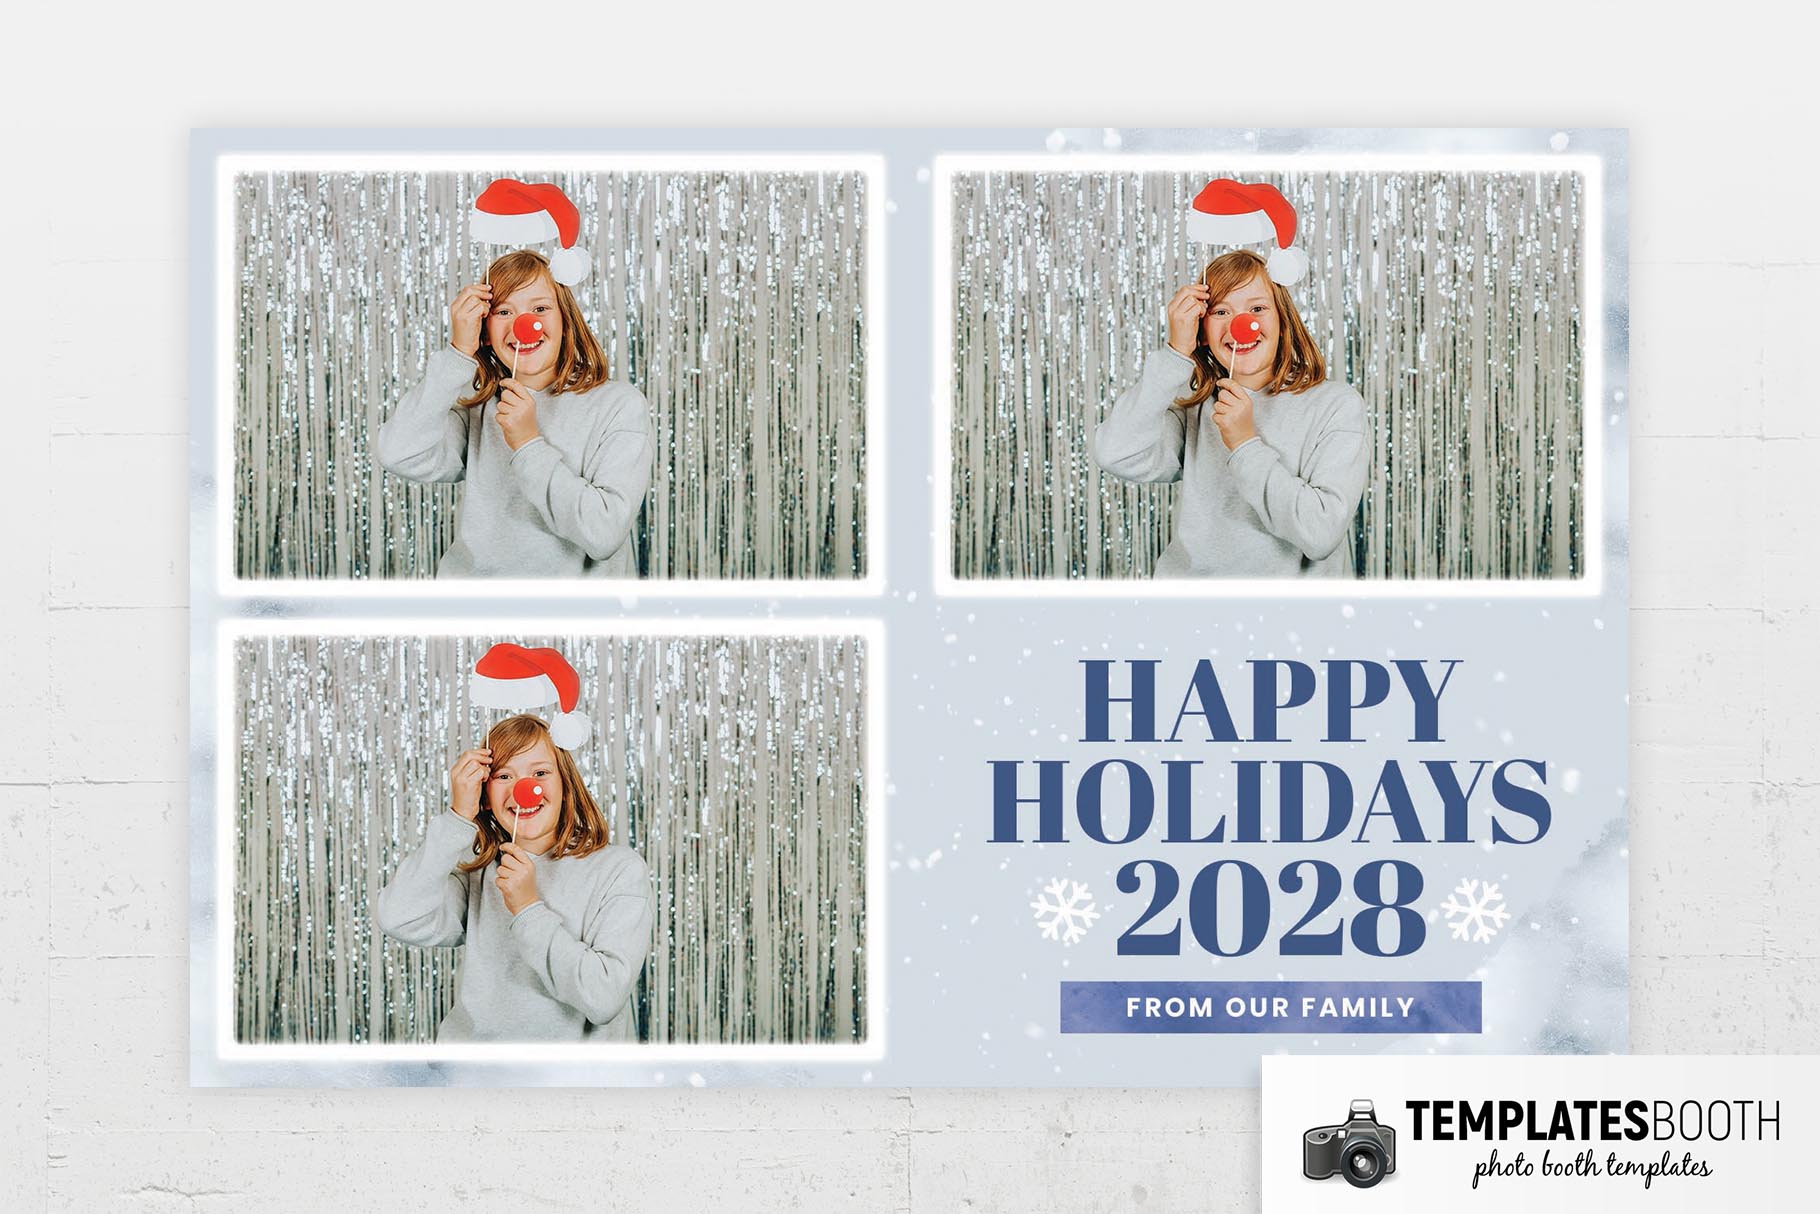 Free Winter Photo Booth Template (PSD, PNG, DSLR Booth, Darkroom Formats)